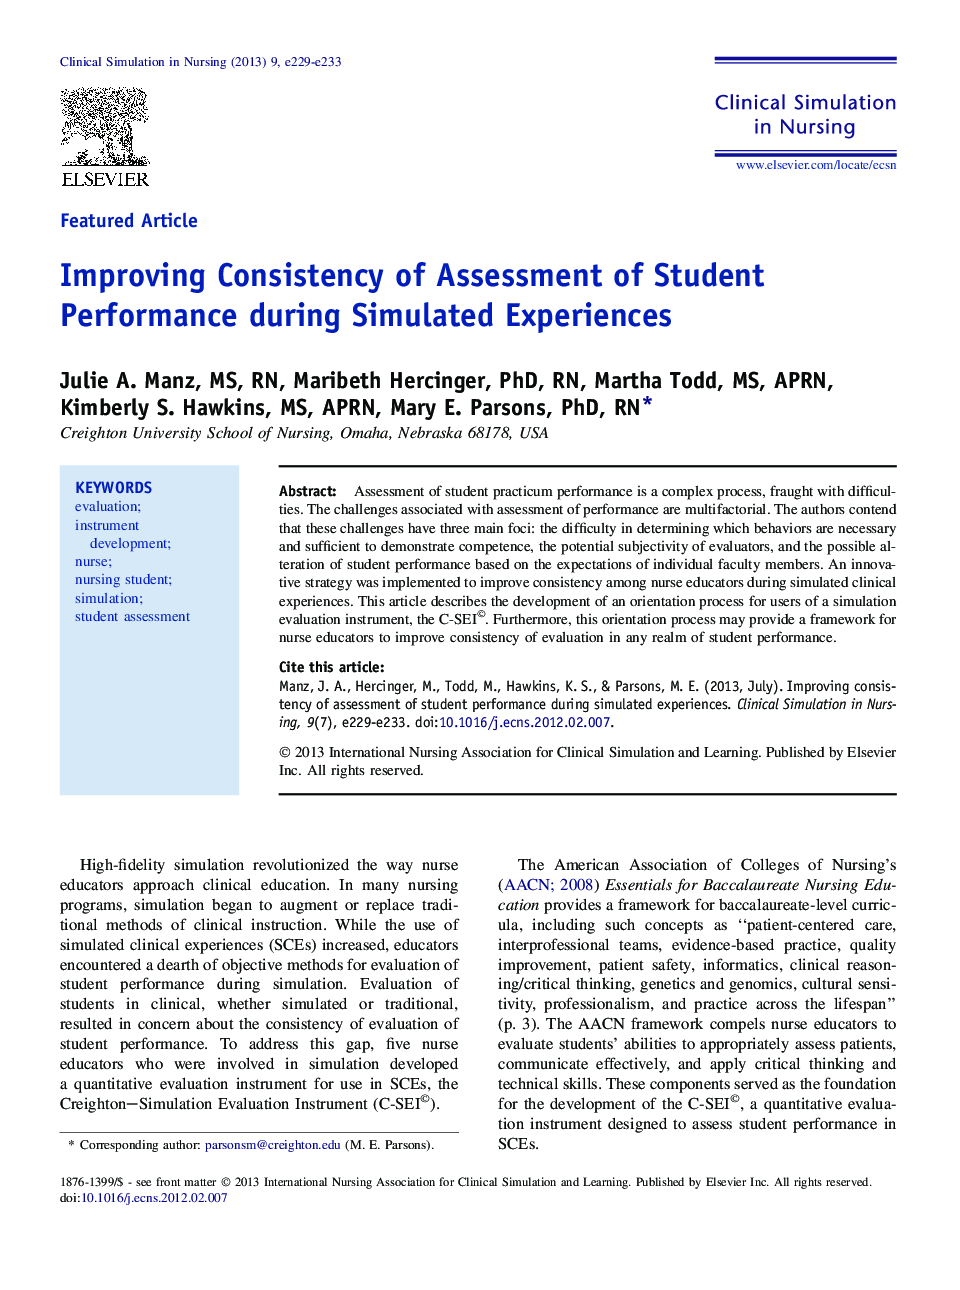 Improving Consistency of Assessment of Student Performance during Simulated Experiences